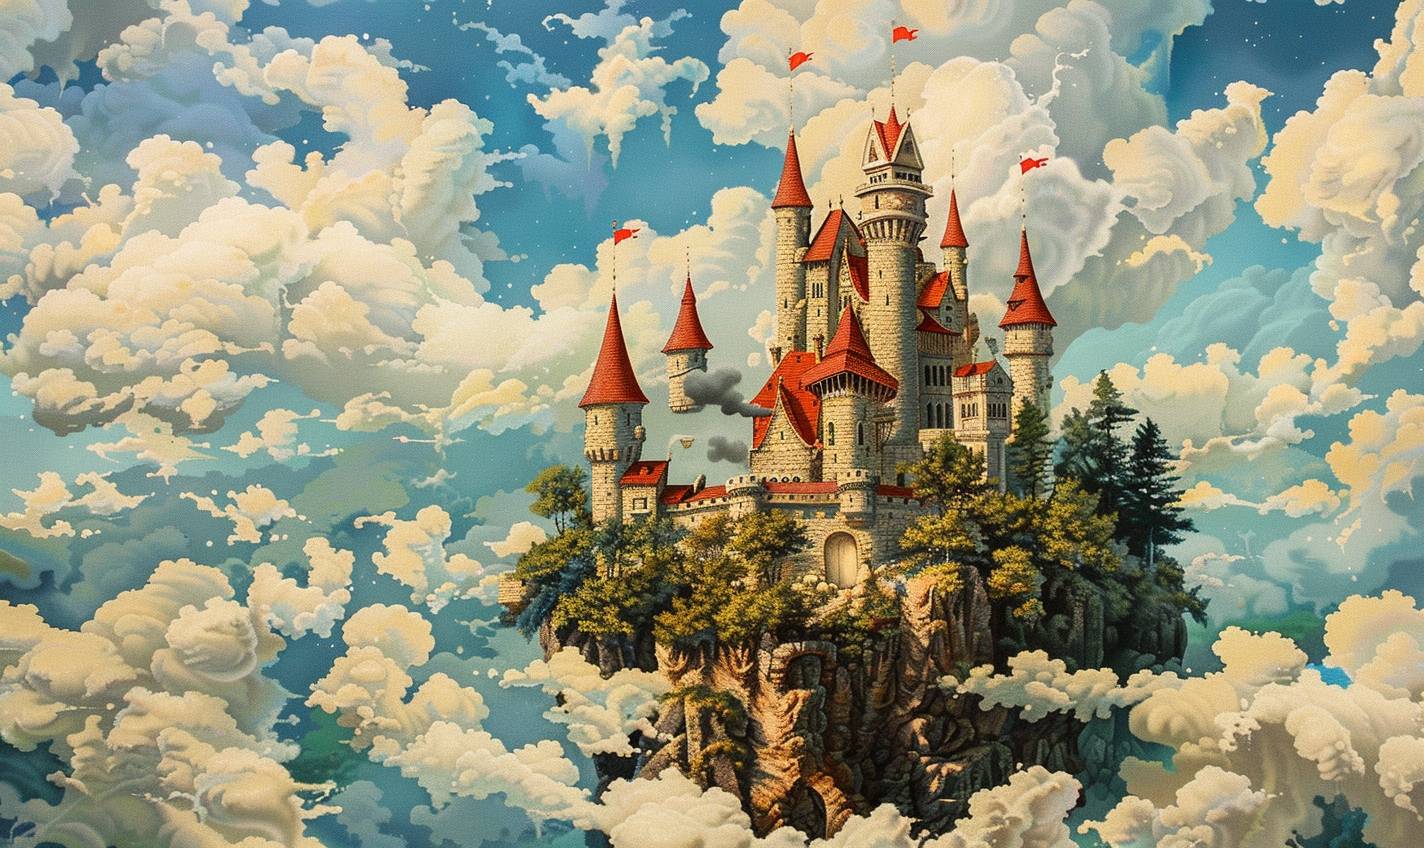 In the style of Grandma Moses, Fairy tale castle in the clouds